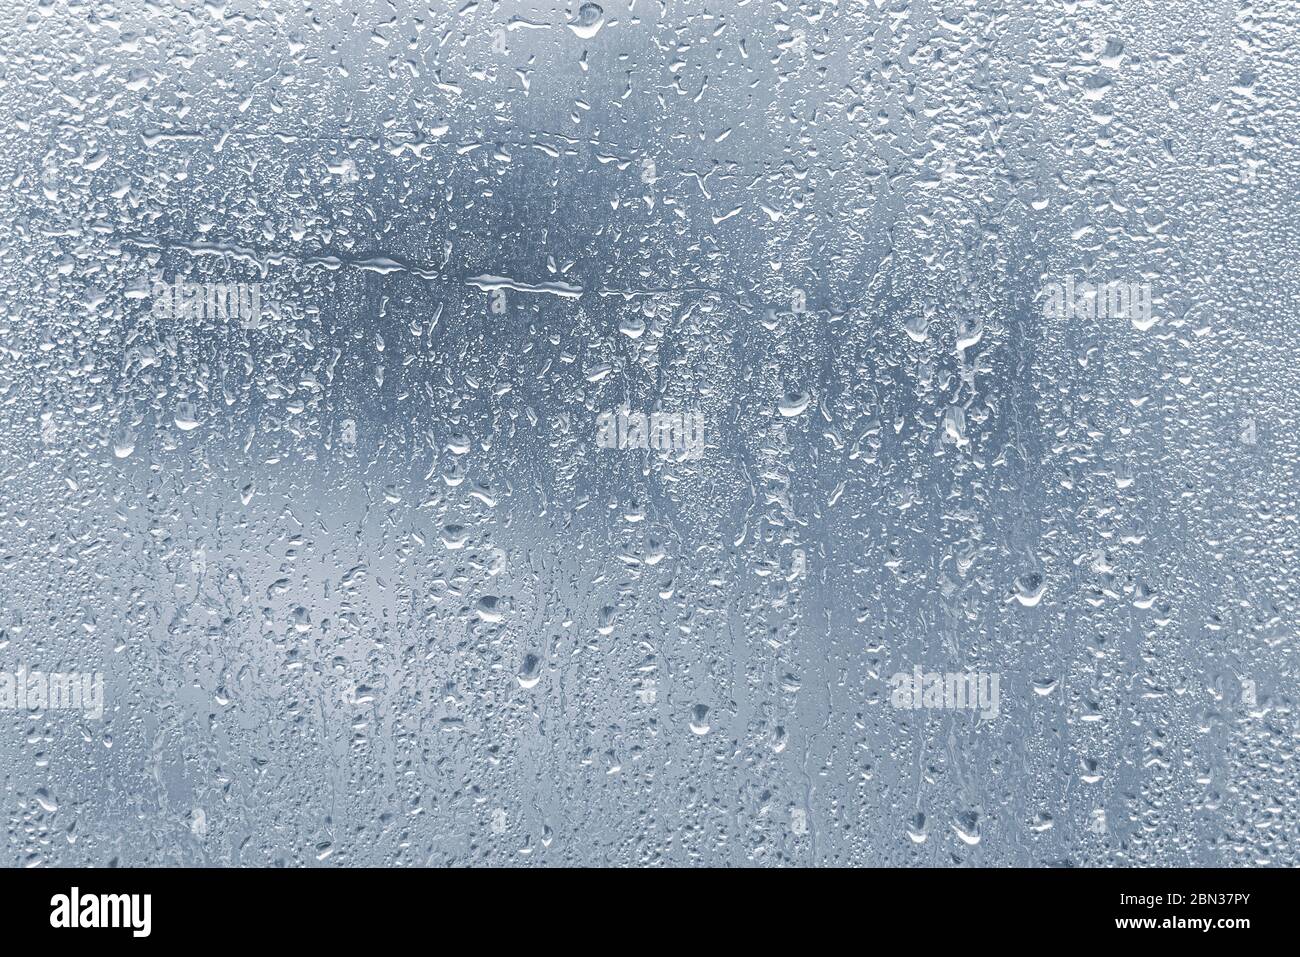 Raindrops, condensation on the glass window during heavy rain, water drops on blue glass Stock Photo